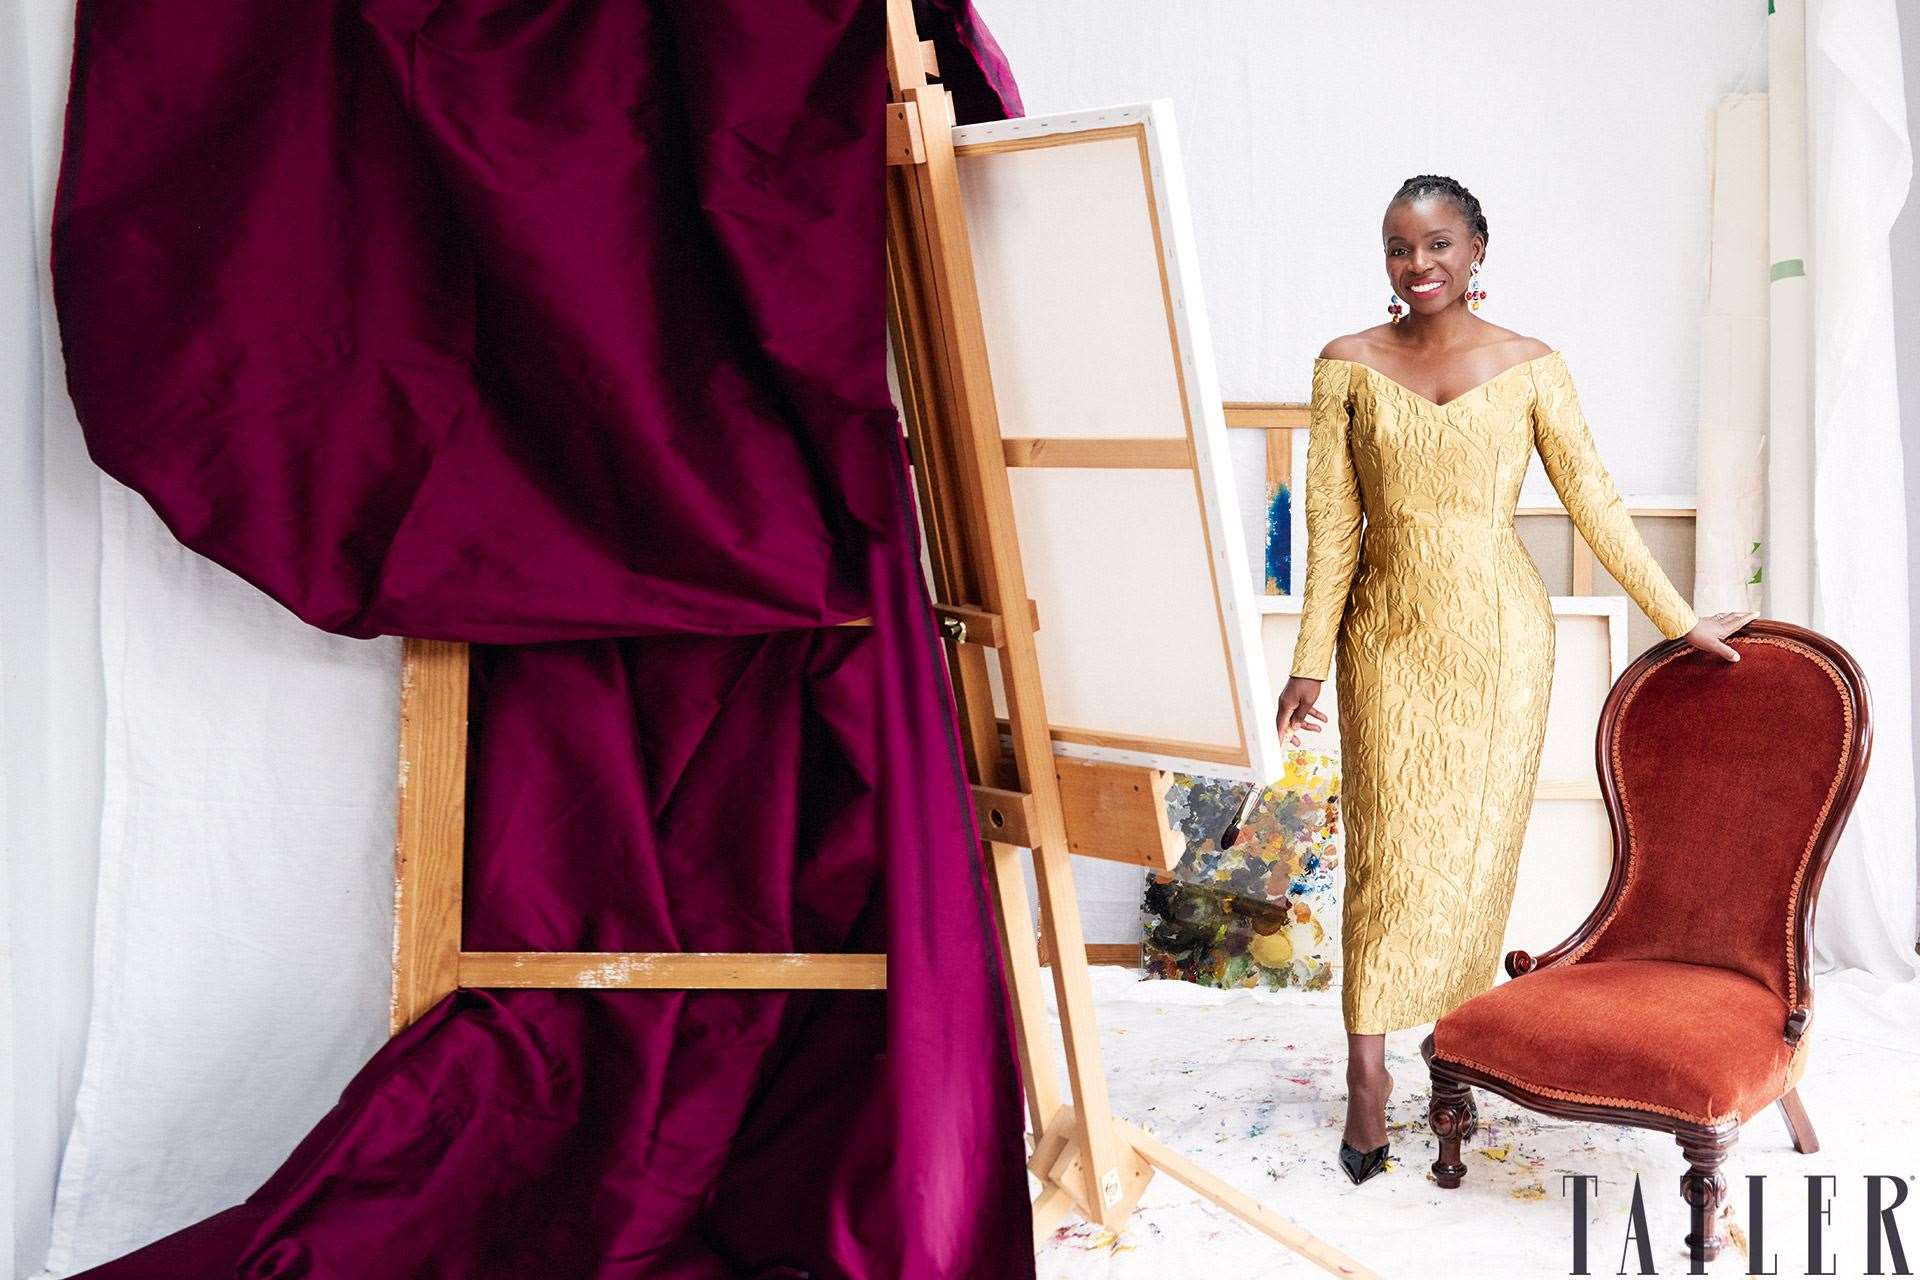 British-Zambian artist Hannah Uzor took inspiration for the portrait from Kate’s cancer diagnosis video message (Tatler/PA)